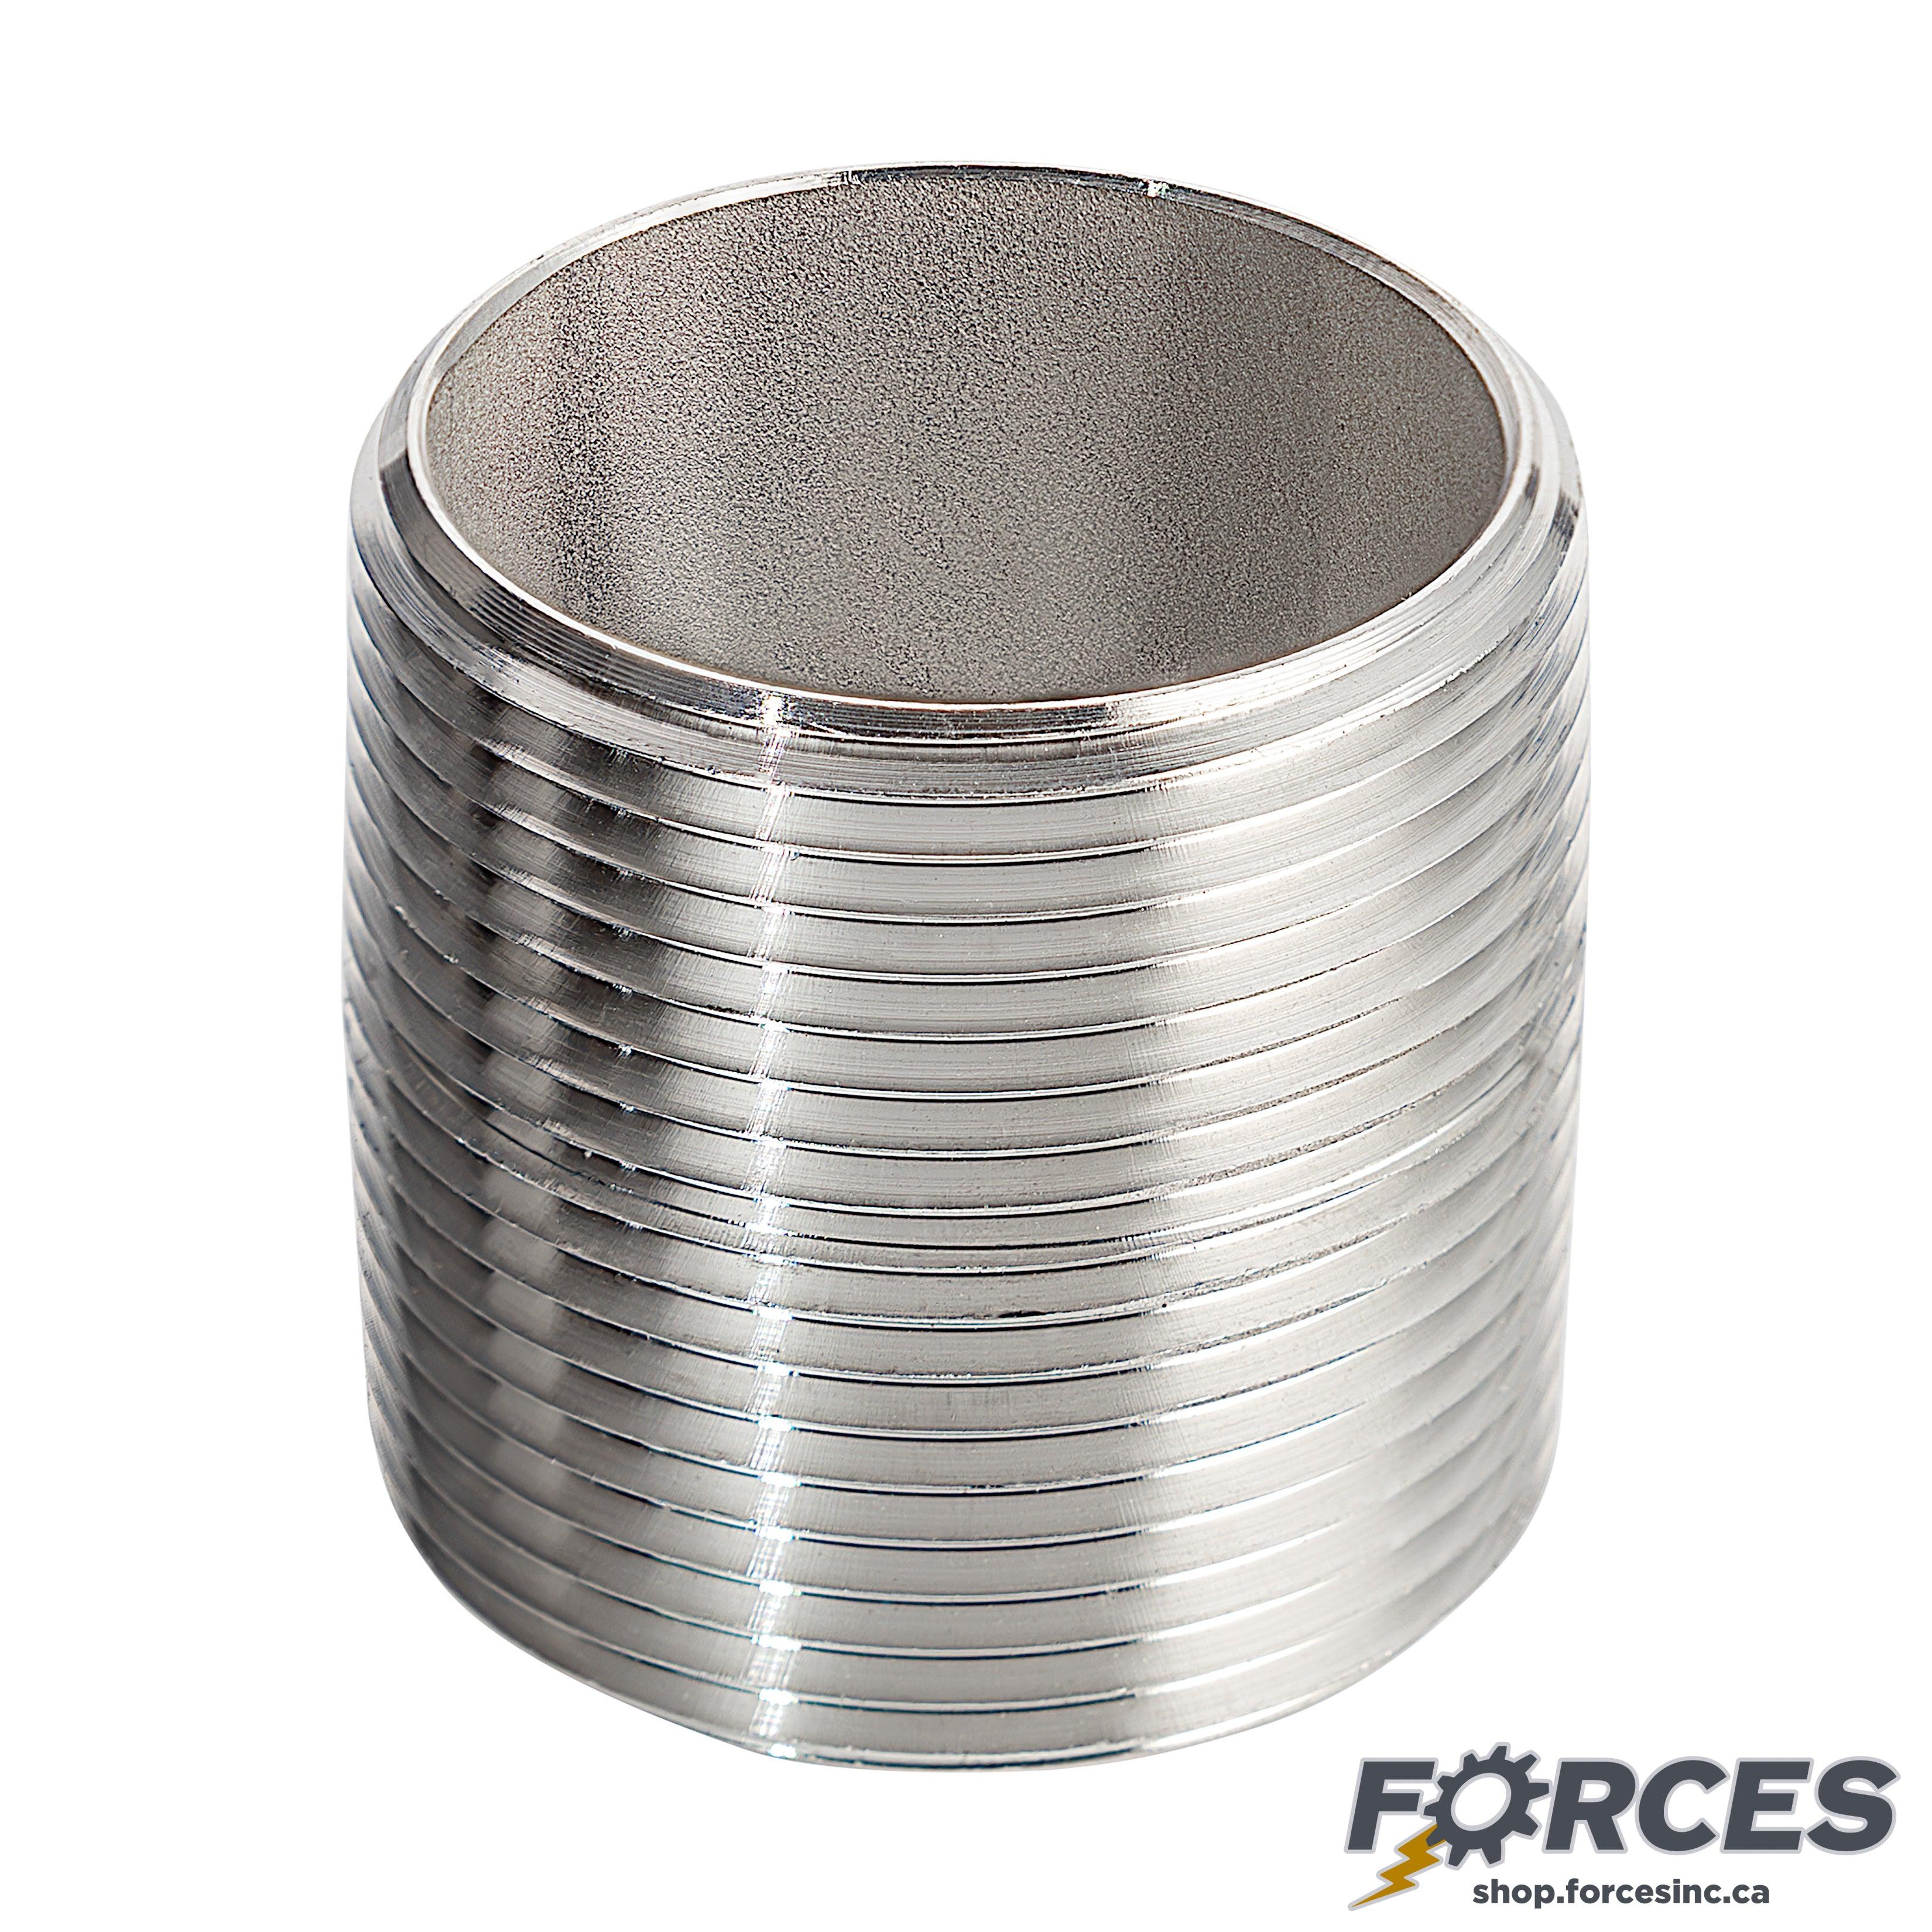 3/4" Closed Nipple - Stainless Steel 316 - Forces Inc